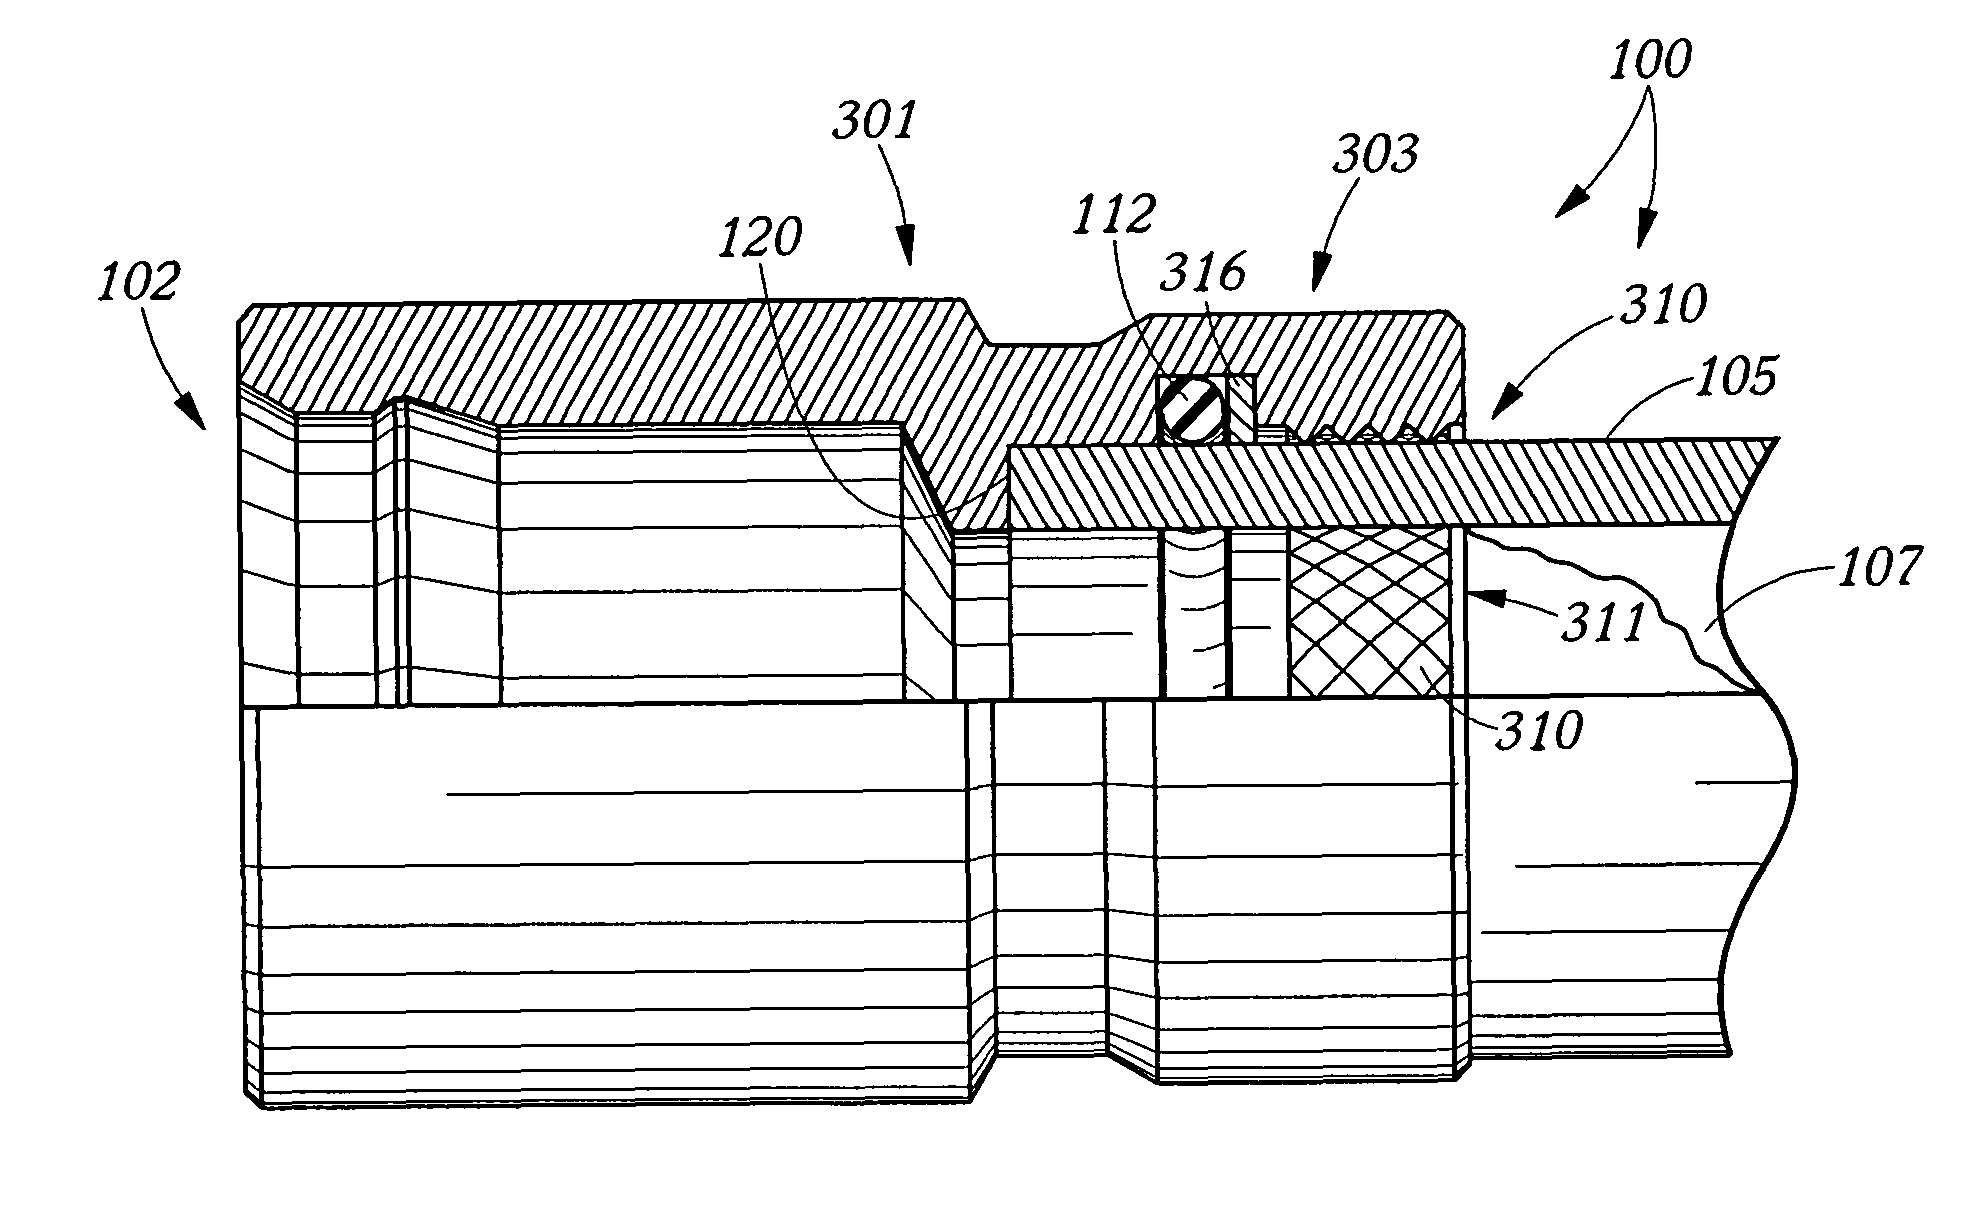 Crimped/swaged-on tubing terminations and methods